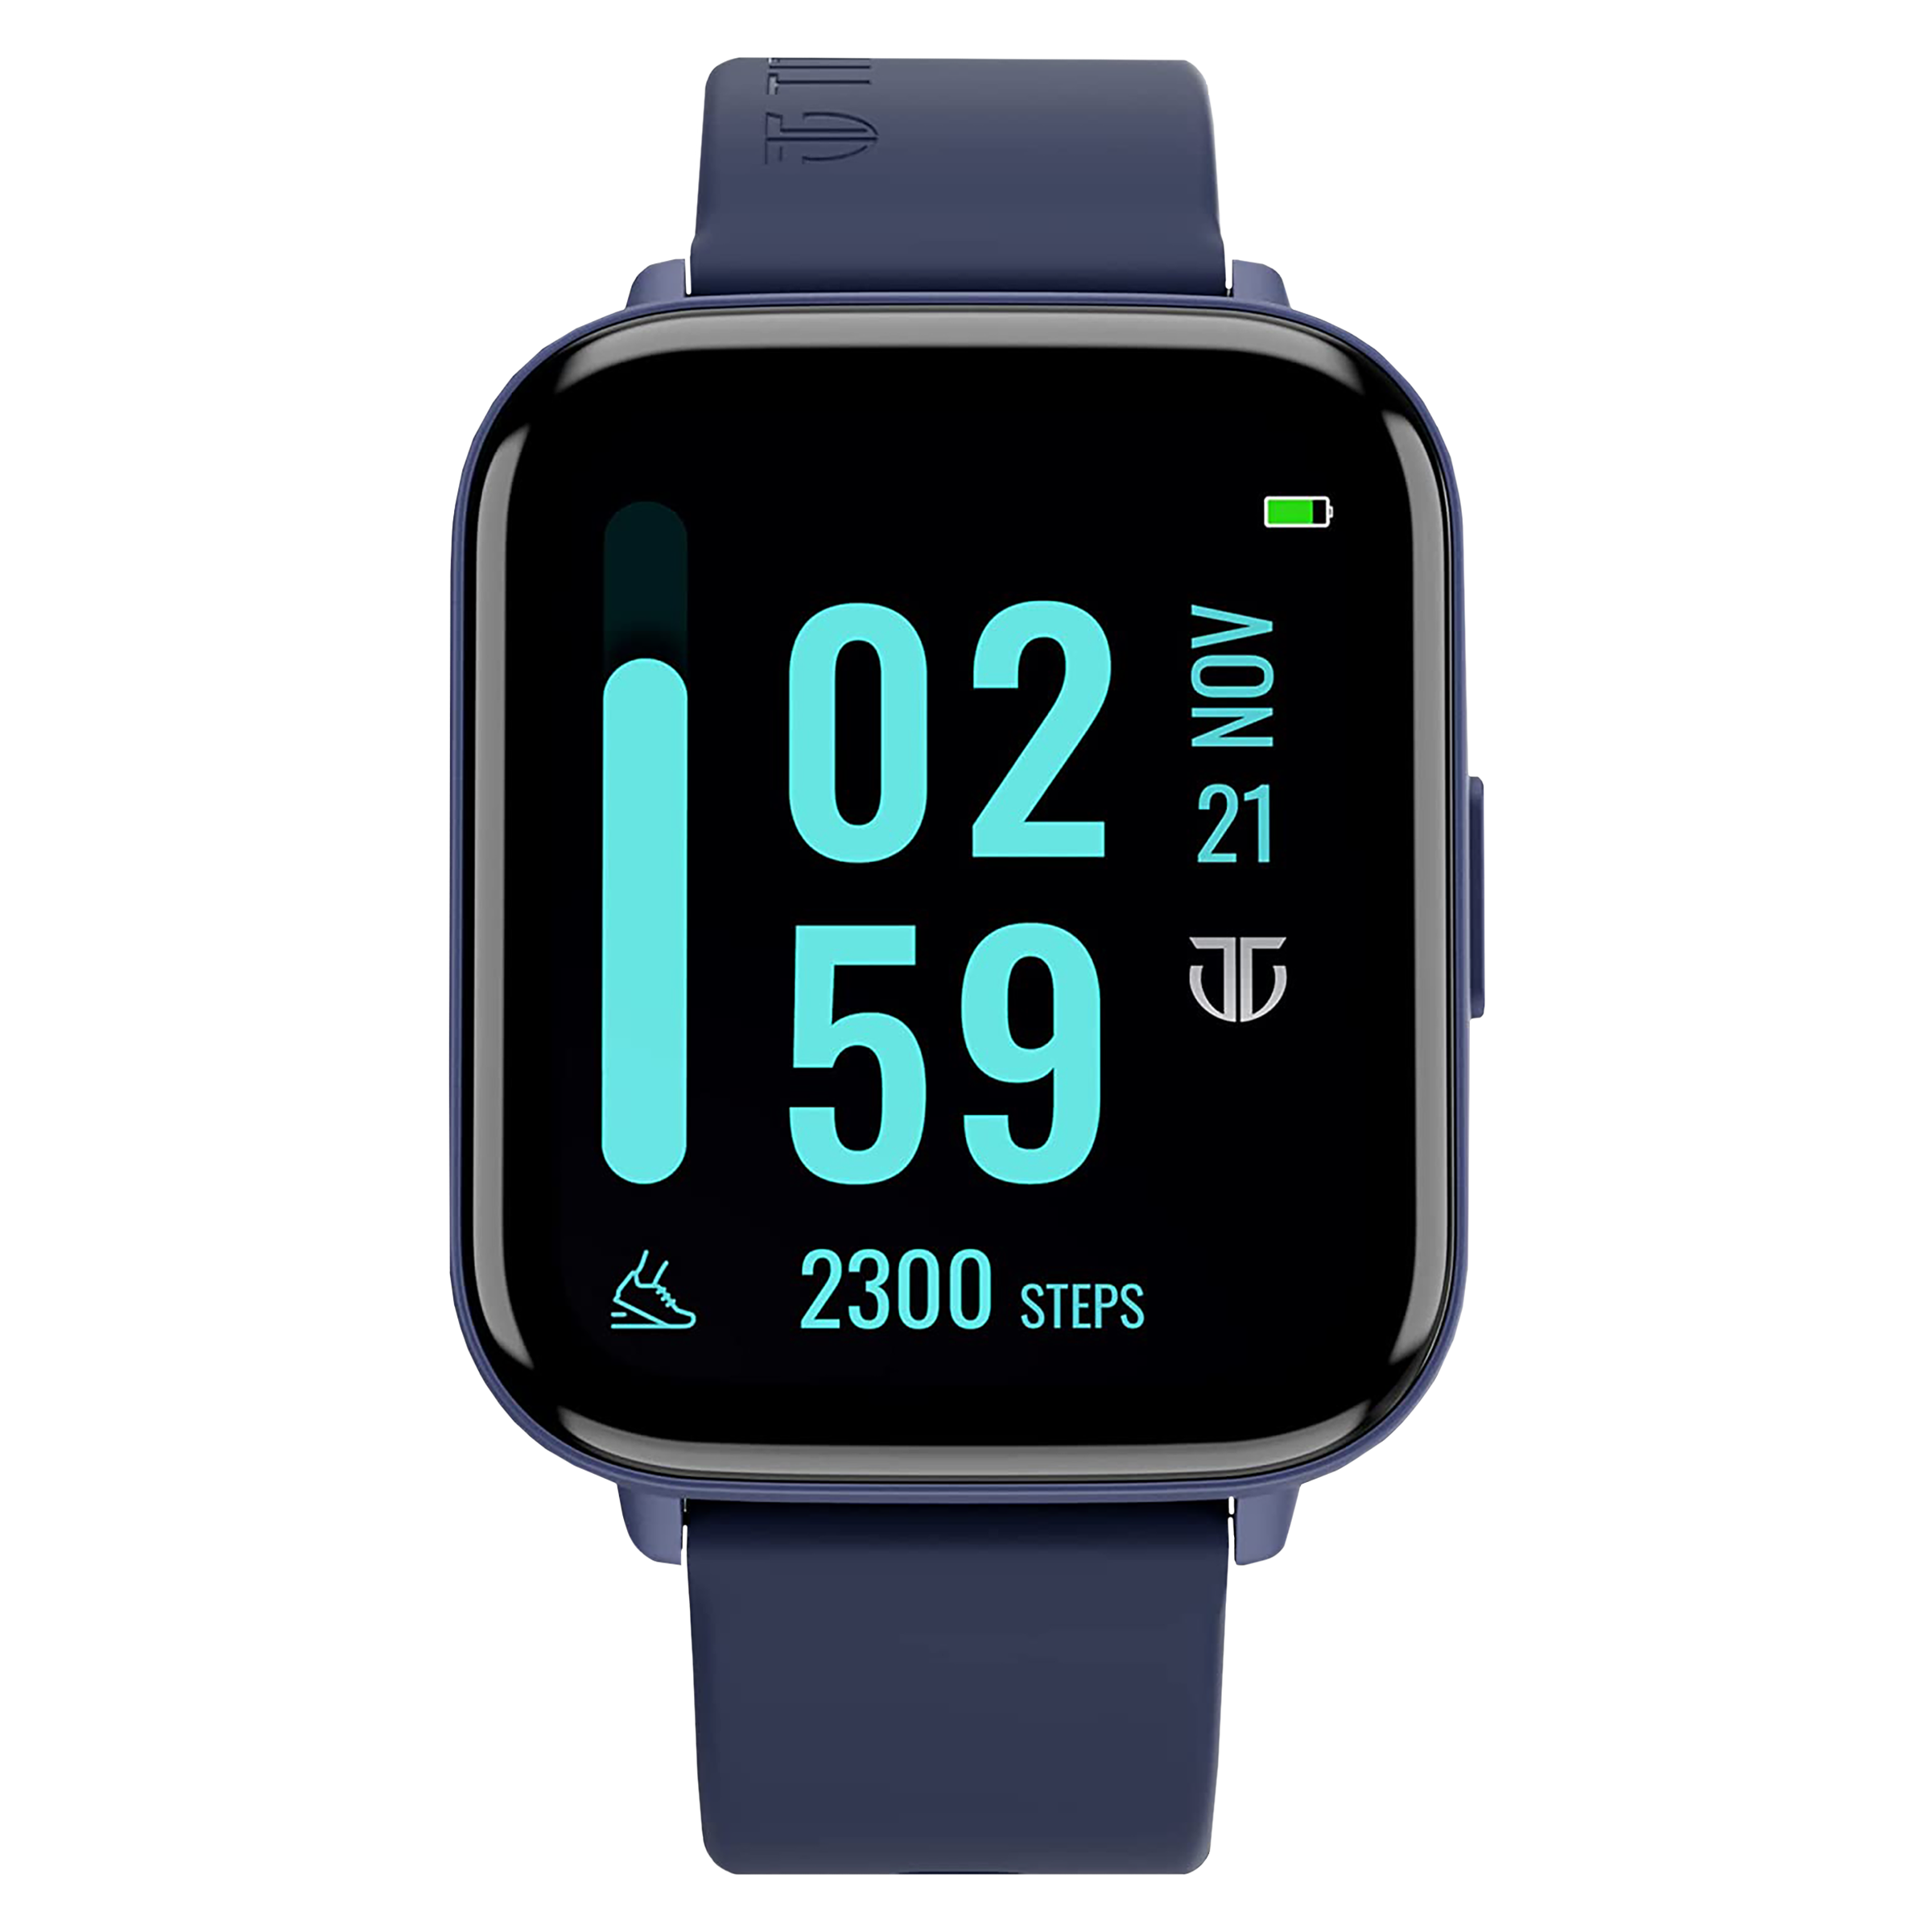 Buy Gyroscope Apple Watch Online at Best Prices | Croma